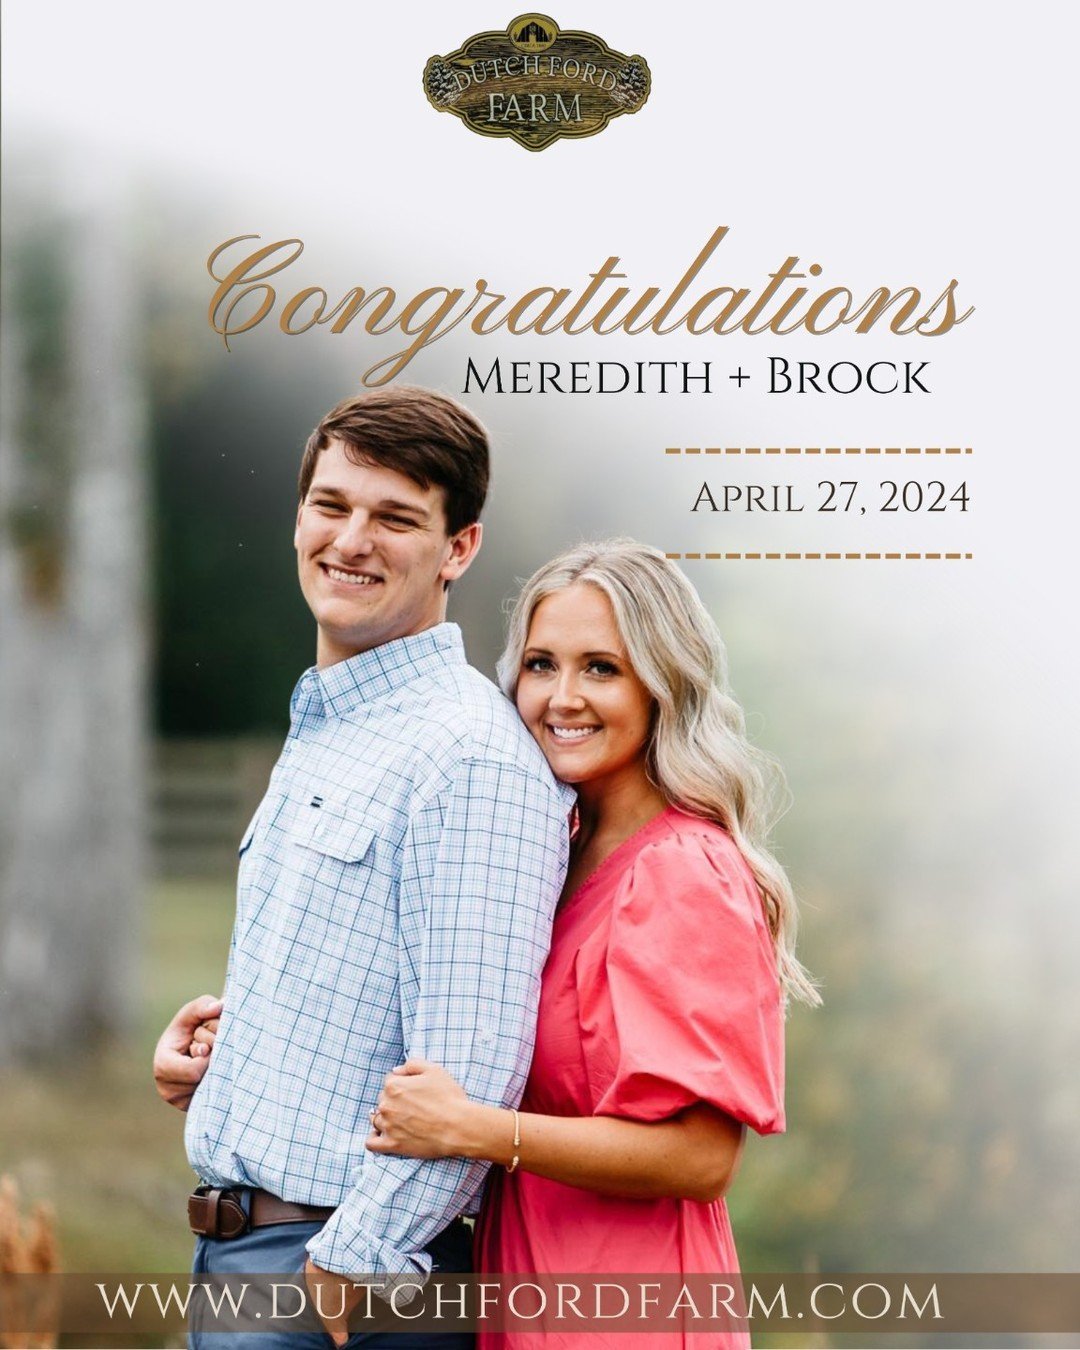 Heartfelt congratulations🥂 to Brock and Meredith on your wedding day! It's a true honor for Dutch Ford Farm to be part of this milestone in your ❤️love story. May your life together be filled with love and happiness!!! #DestinationWedding #DreamEsca